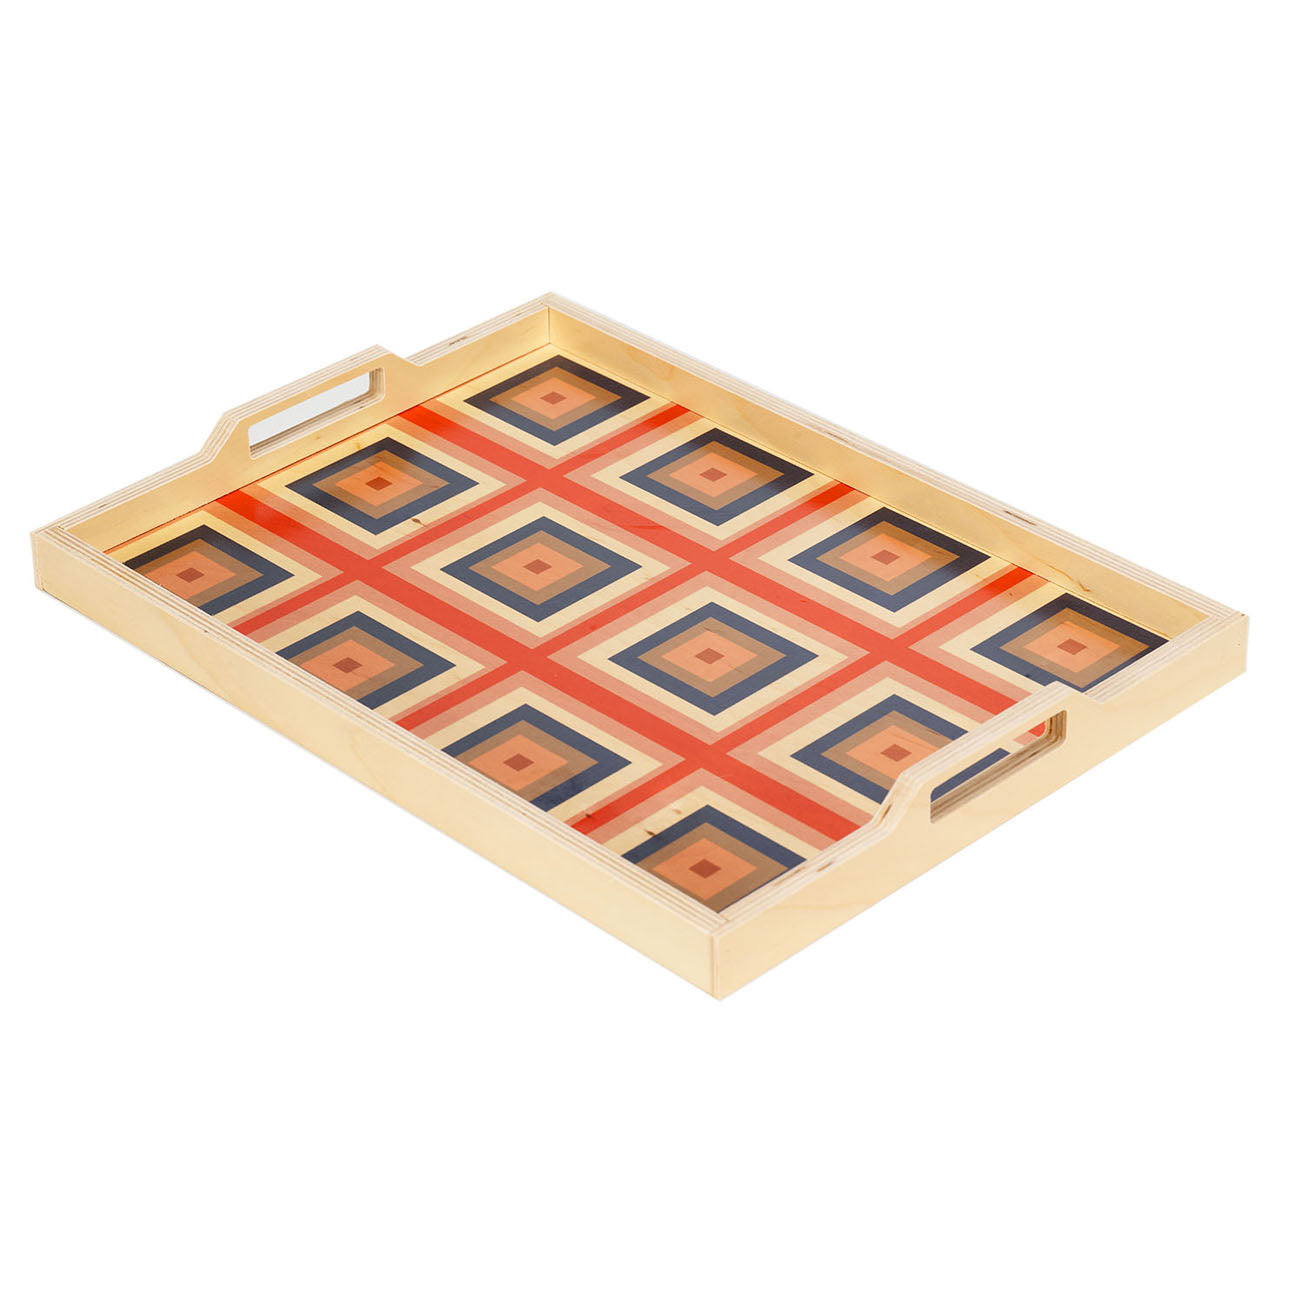 Squaresville peach serving tray